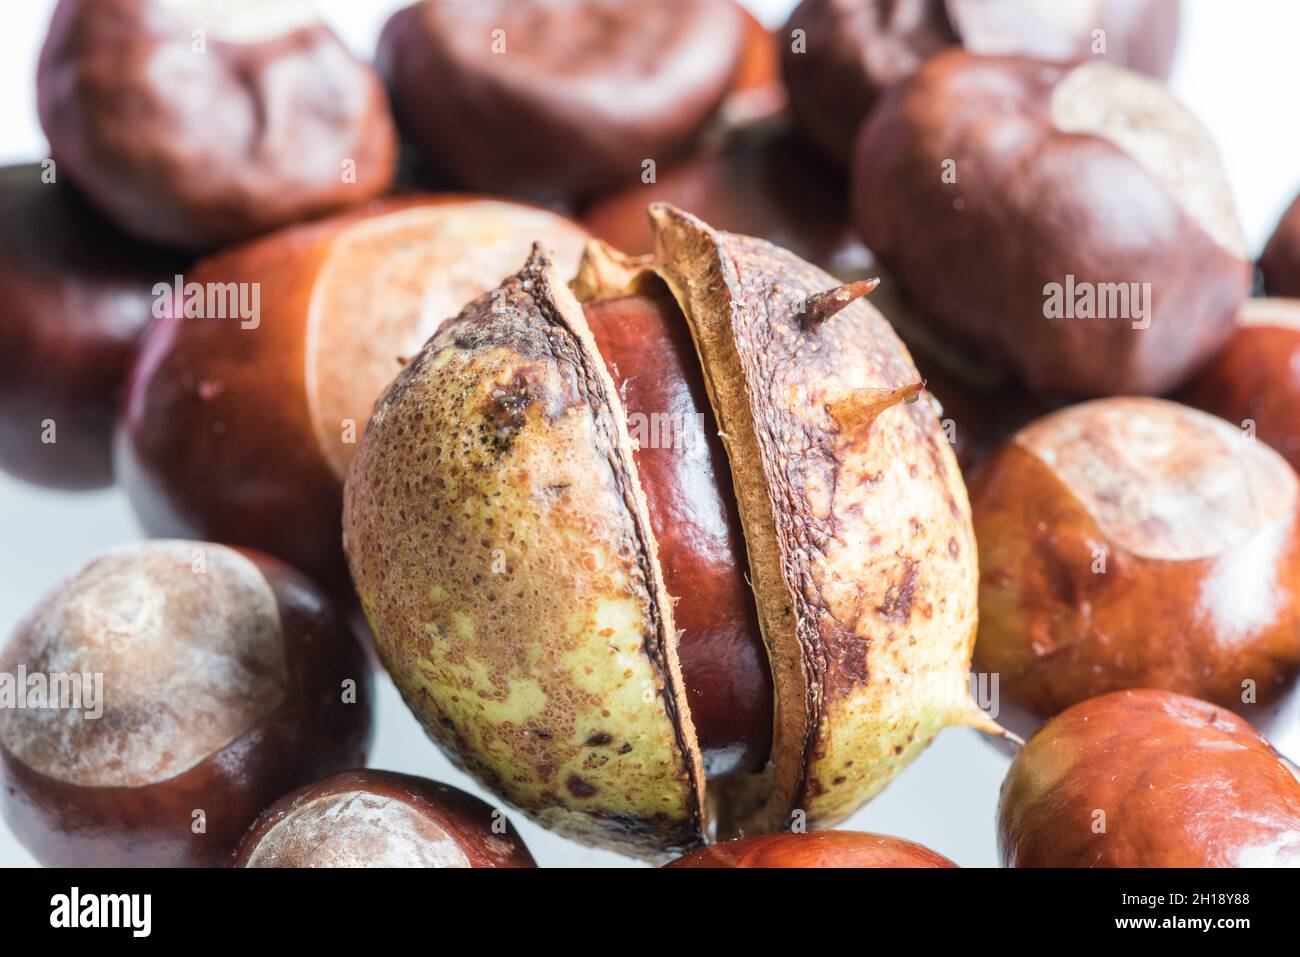 A seed from the Horse Chestnut tree (Aesculus hippocastanum) known in the UK as a conker Stock Photo